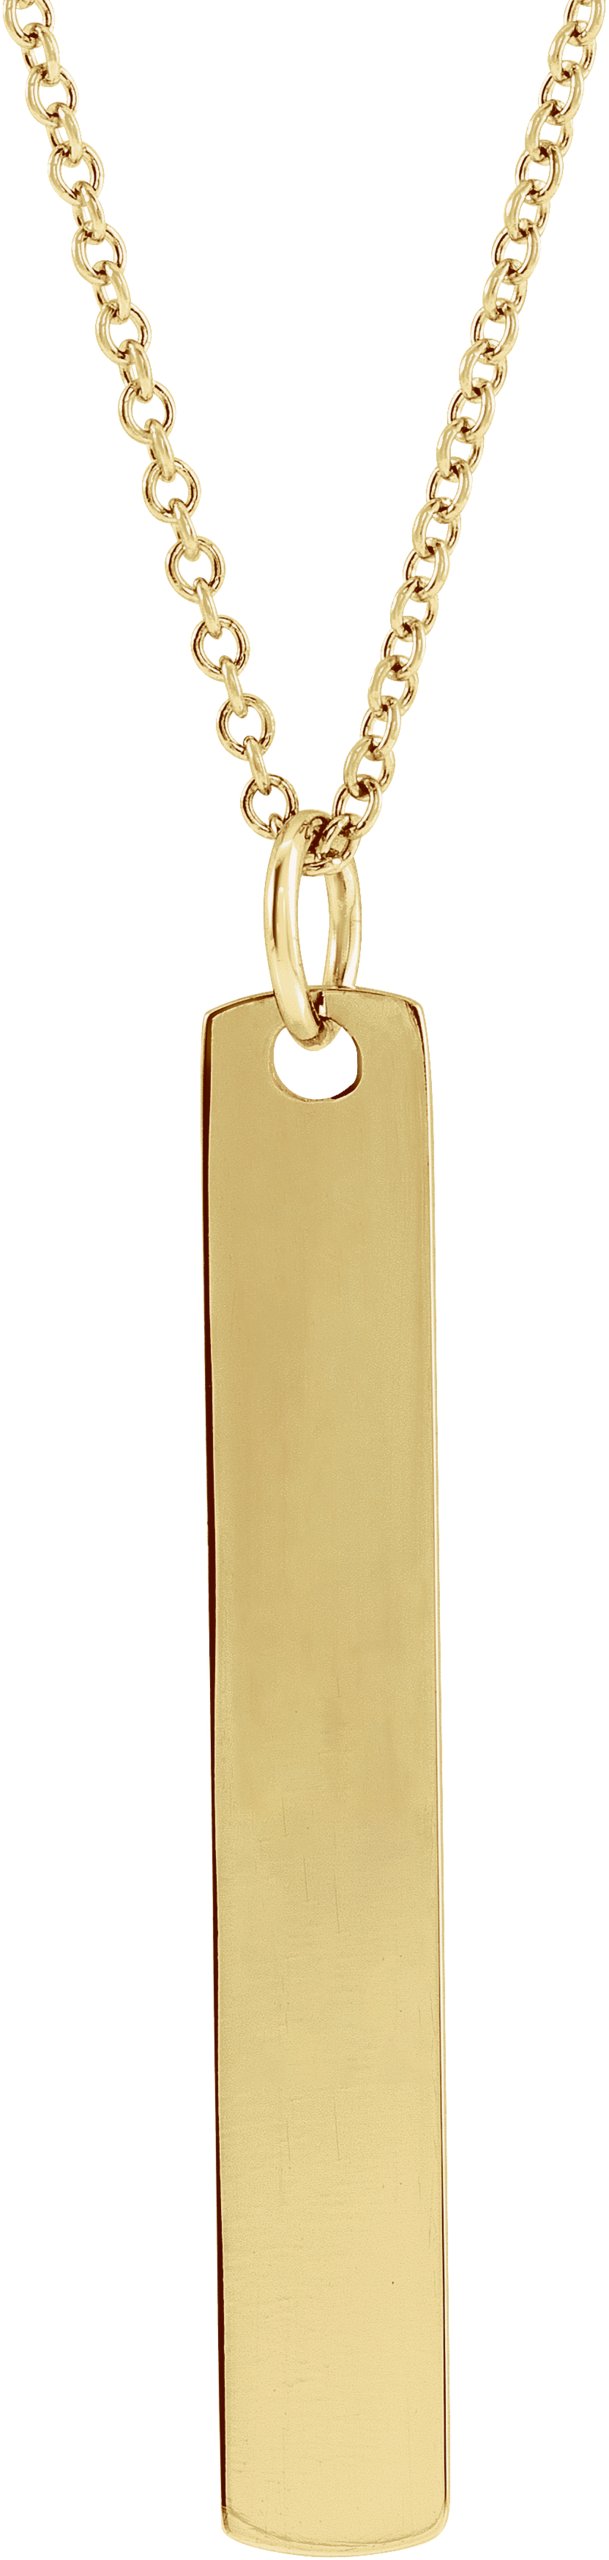 14K Yellow Engravable Bar 16-18" Necklace